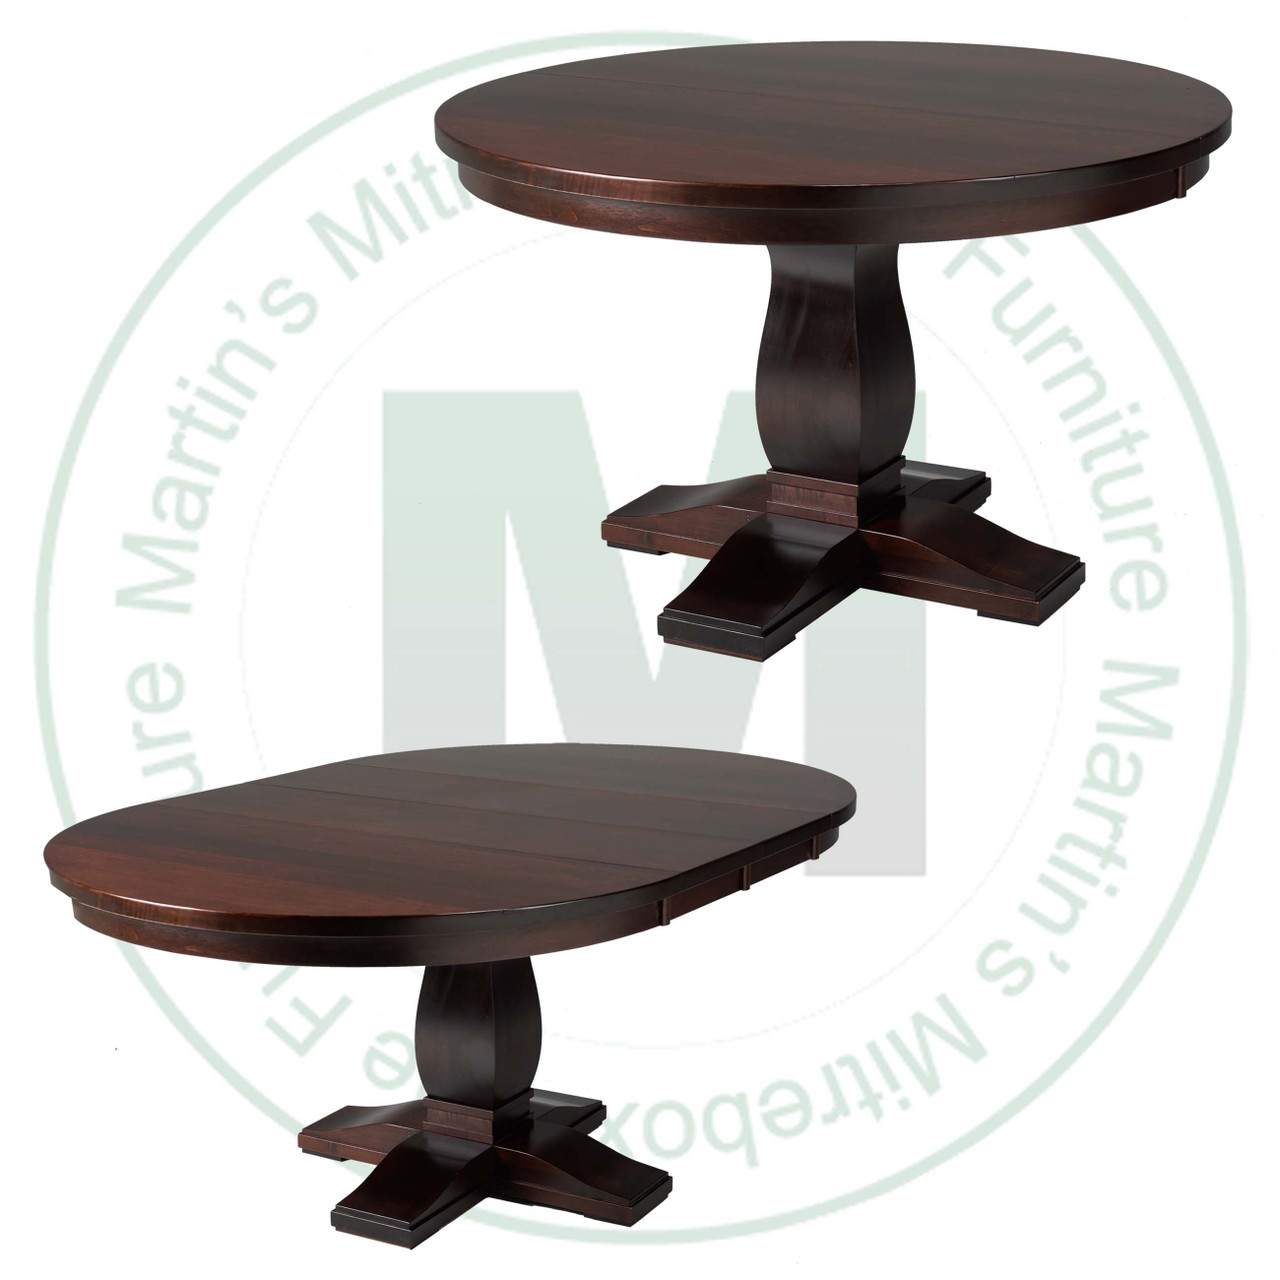 Wormy Maple Valencia Single Pedestal Table 42''D x 48''W x 30''H With 1 - 12'' Leaf Table. Table Has 1'' Thick Top.